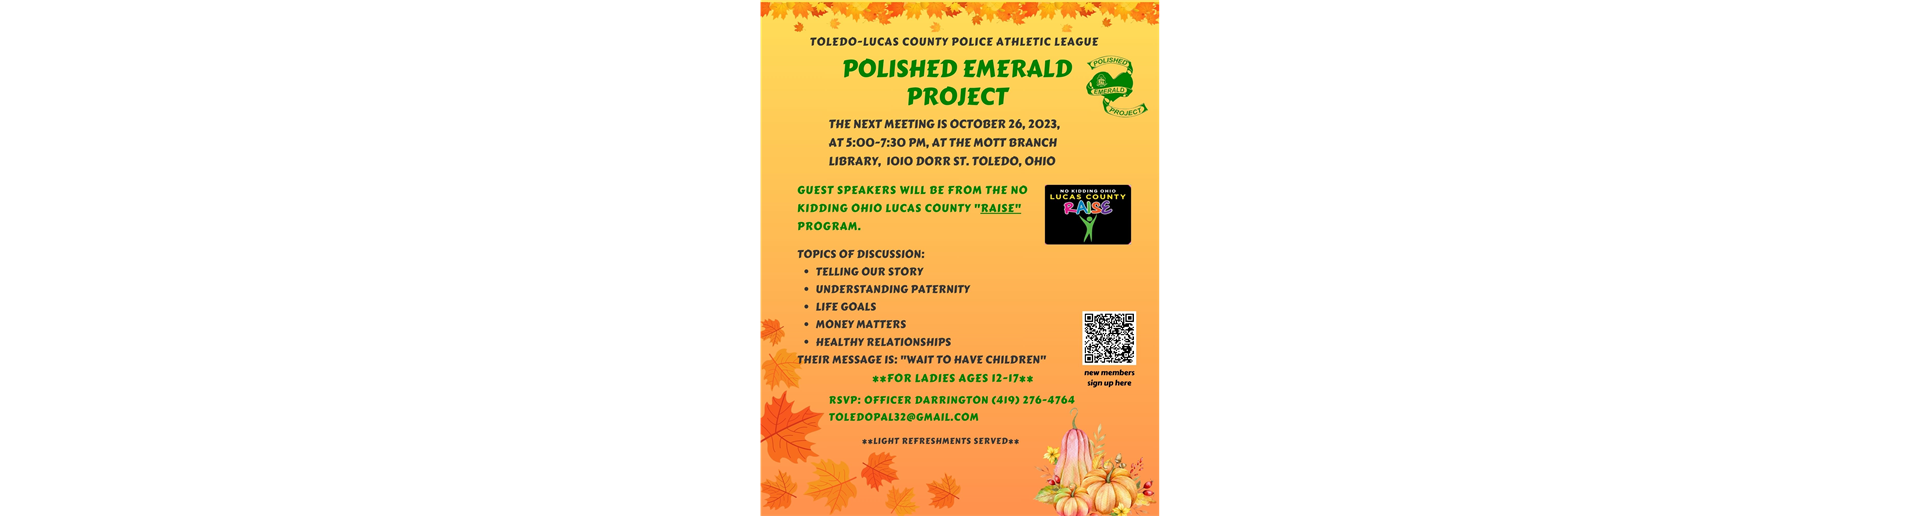 POLISHED EMERALD PROJECT MEETING OCT 26